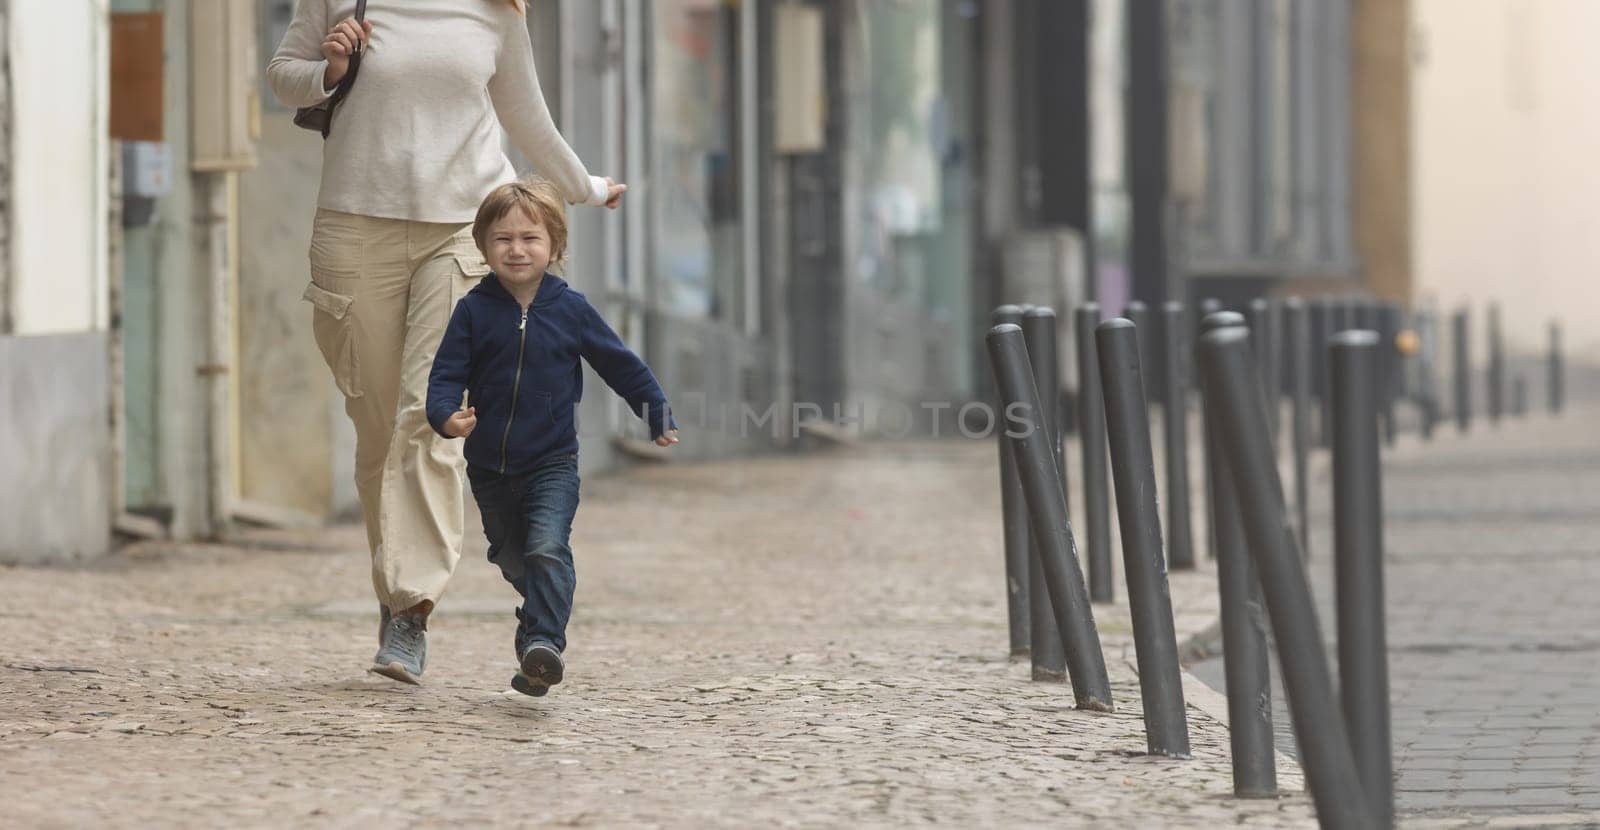 A woman and a child running down a street - telephoto